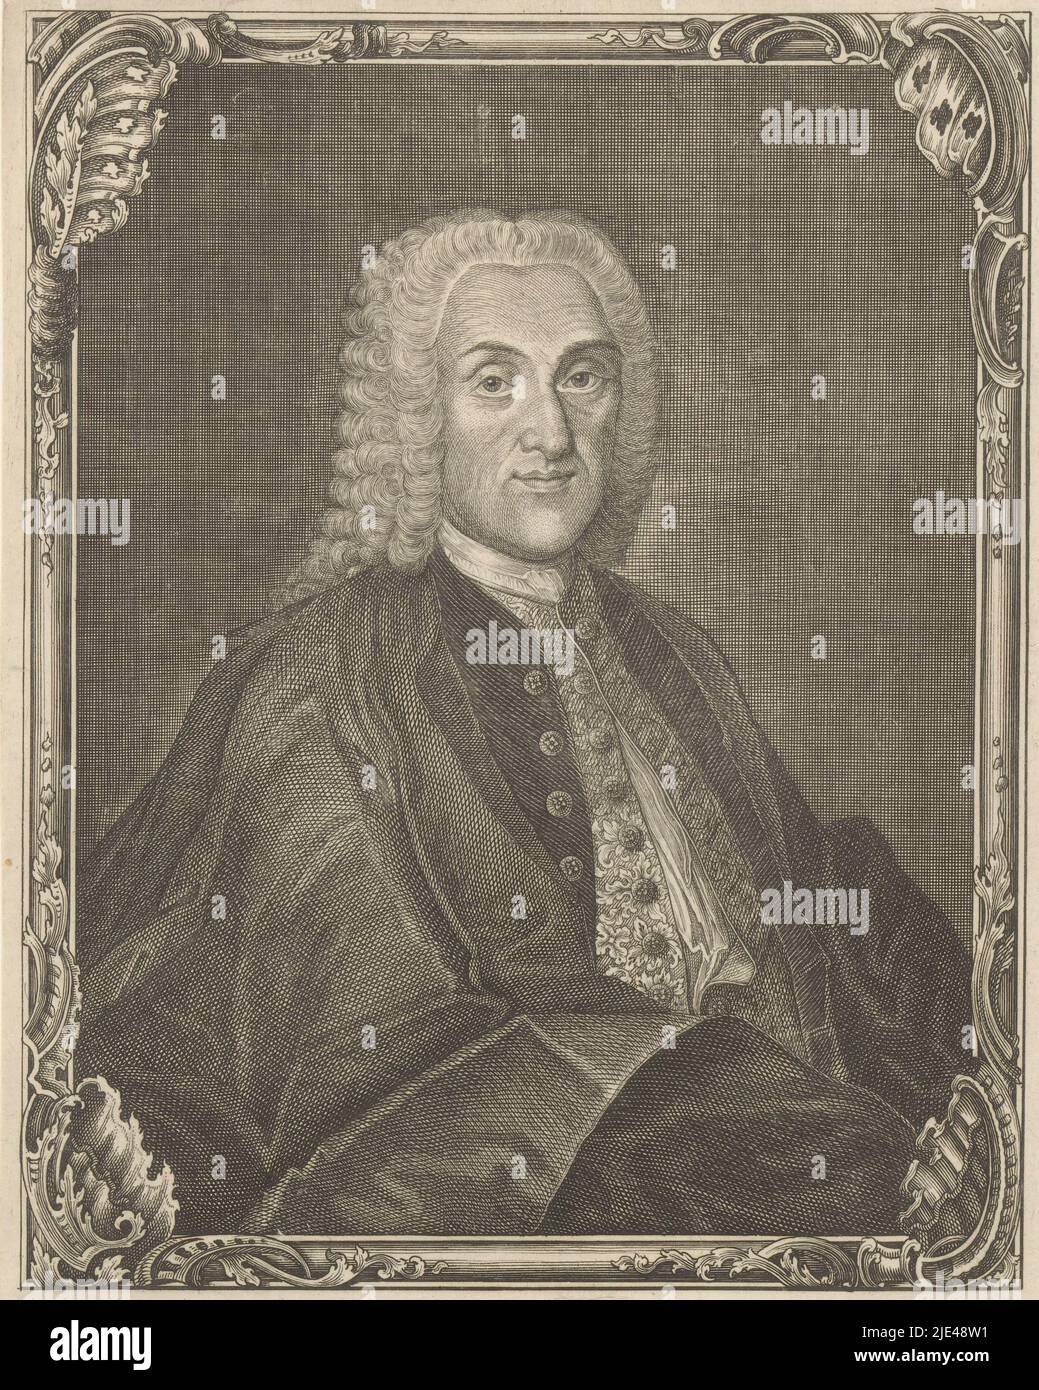 Portrait of Wolfgang Adam Schöpff, G.I. Ostertag, 1700 - 1799, print maker: G.I. Ostertag, (mentioned on object), Lindau im Bodensee, 1700 - 1799, paper, engraving, h 275 mm - w 183 mm Stock Photo